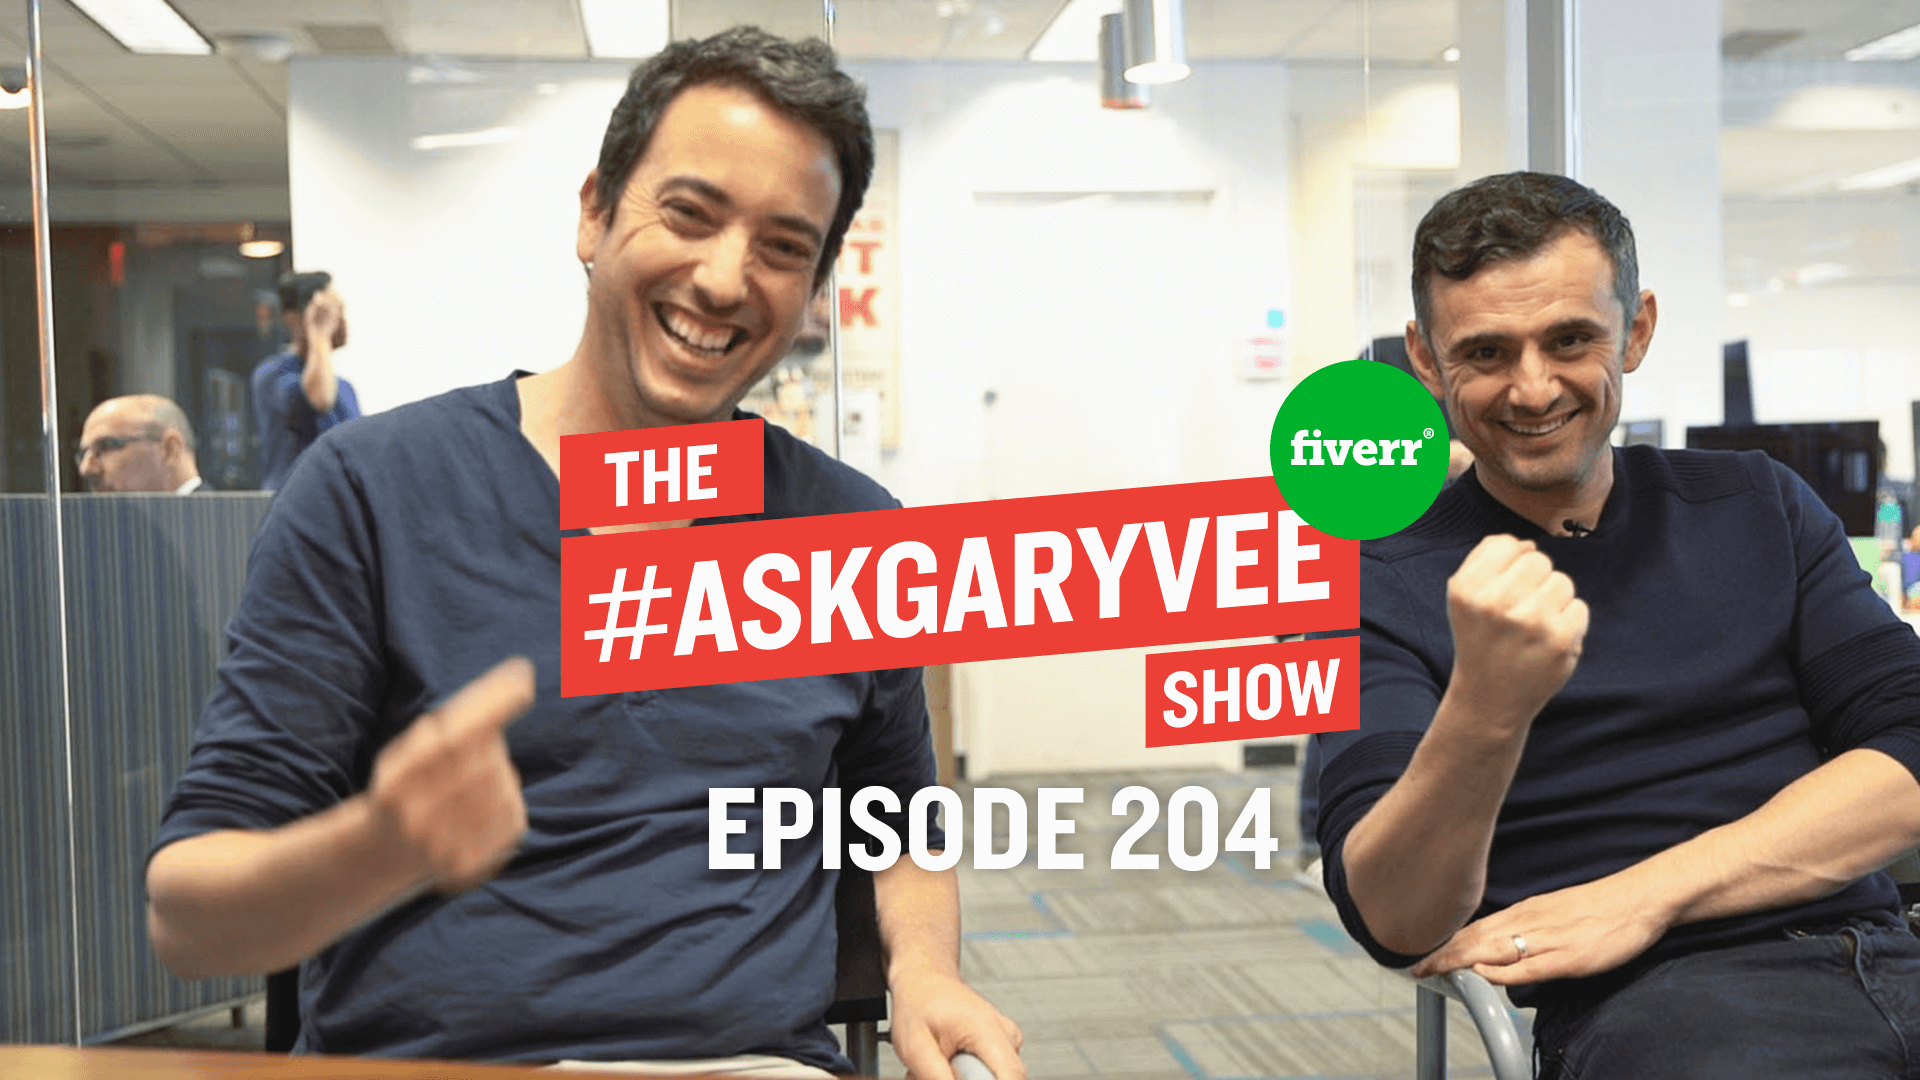 Fiverr & How to Become a Successful Freelancer | #AskGaryVee Episode 204